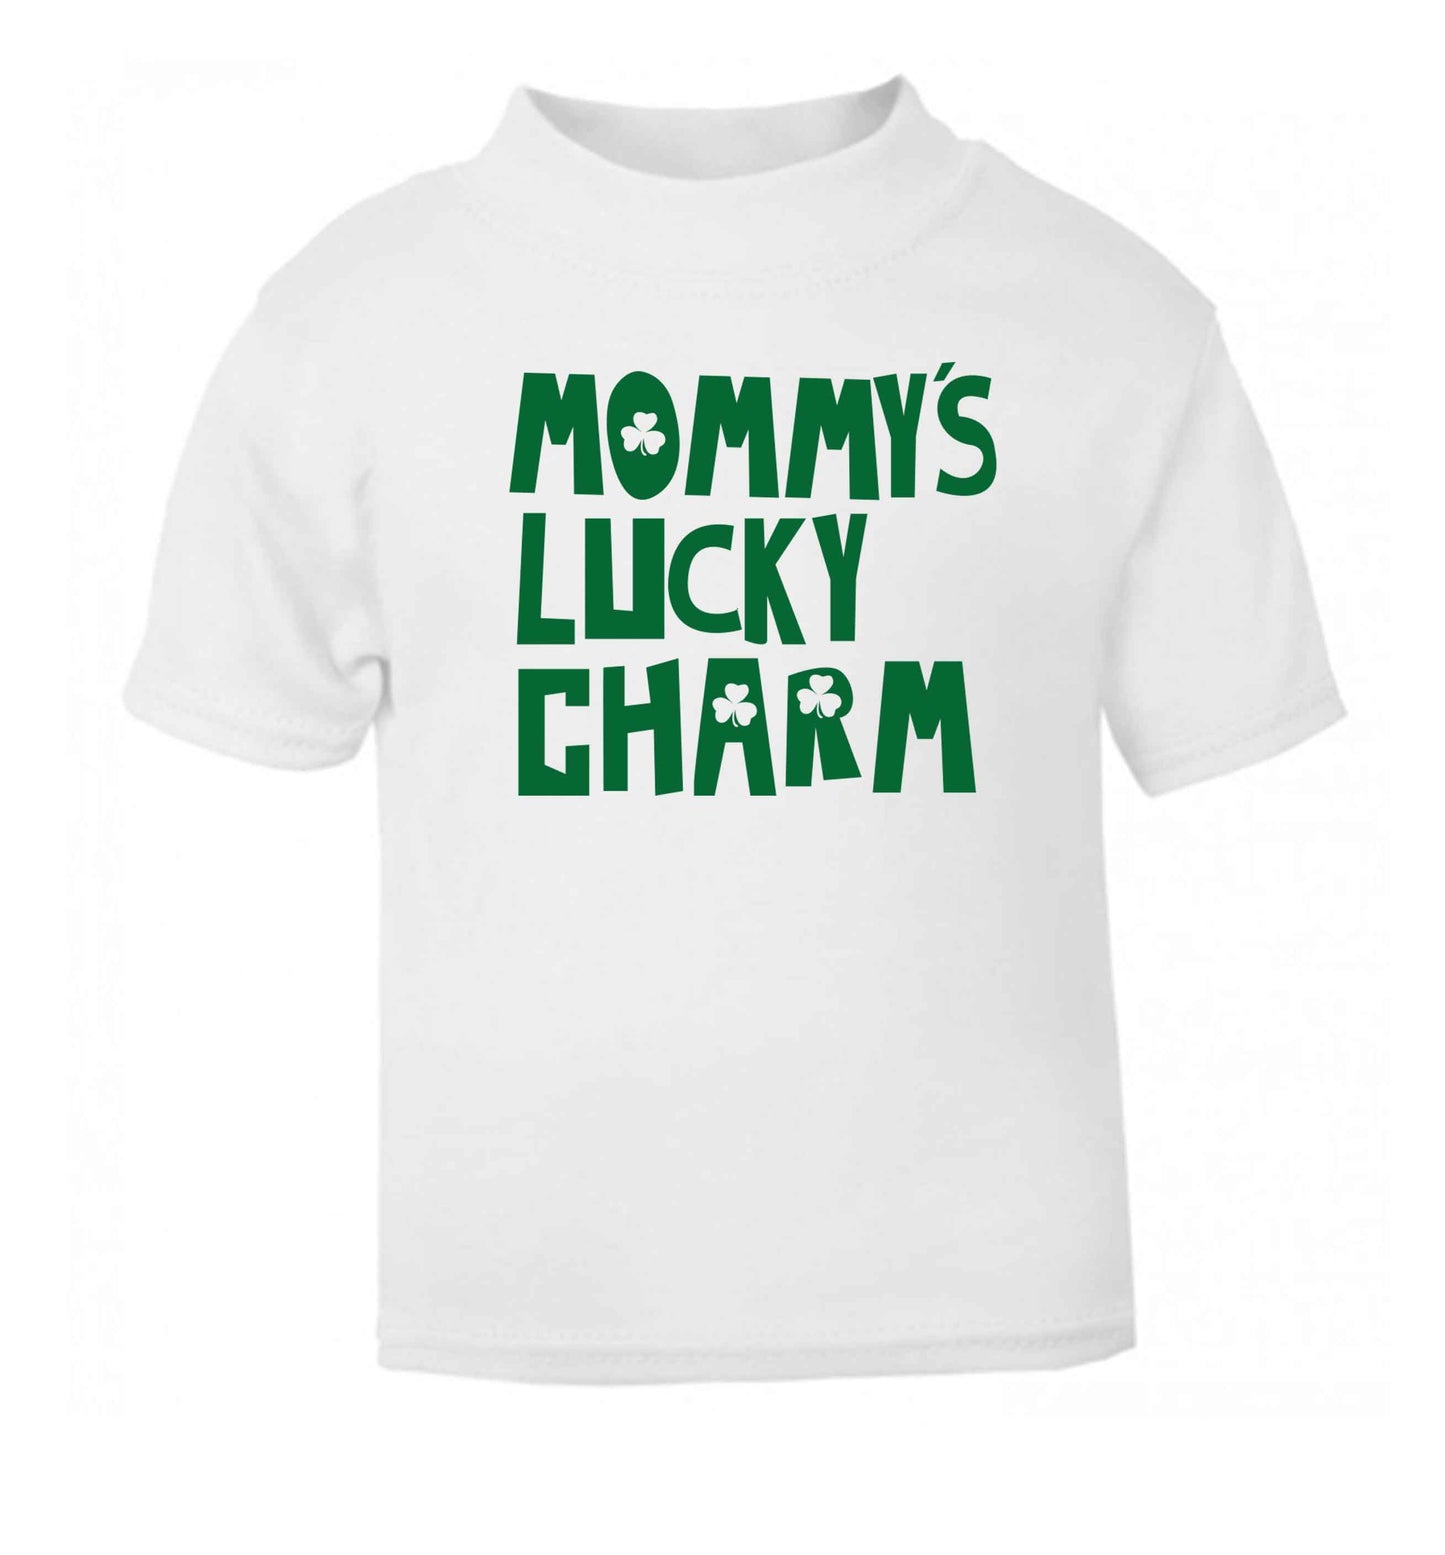 Mommy's lucky charm white baby toddler Tshirt 2 Years